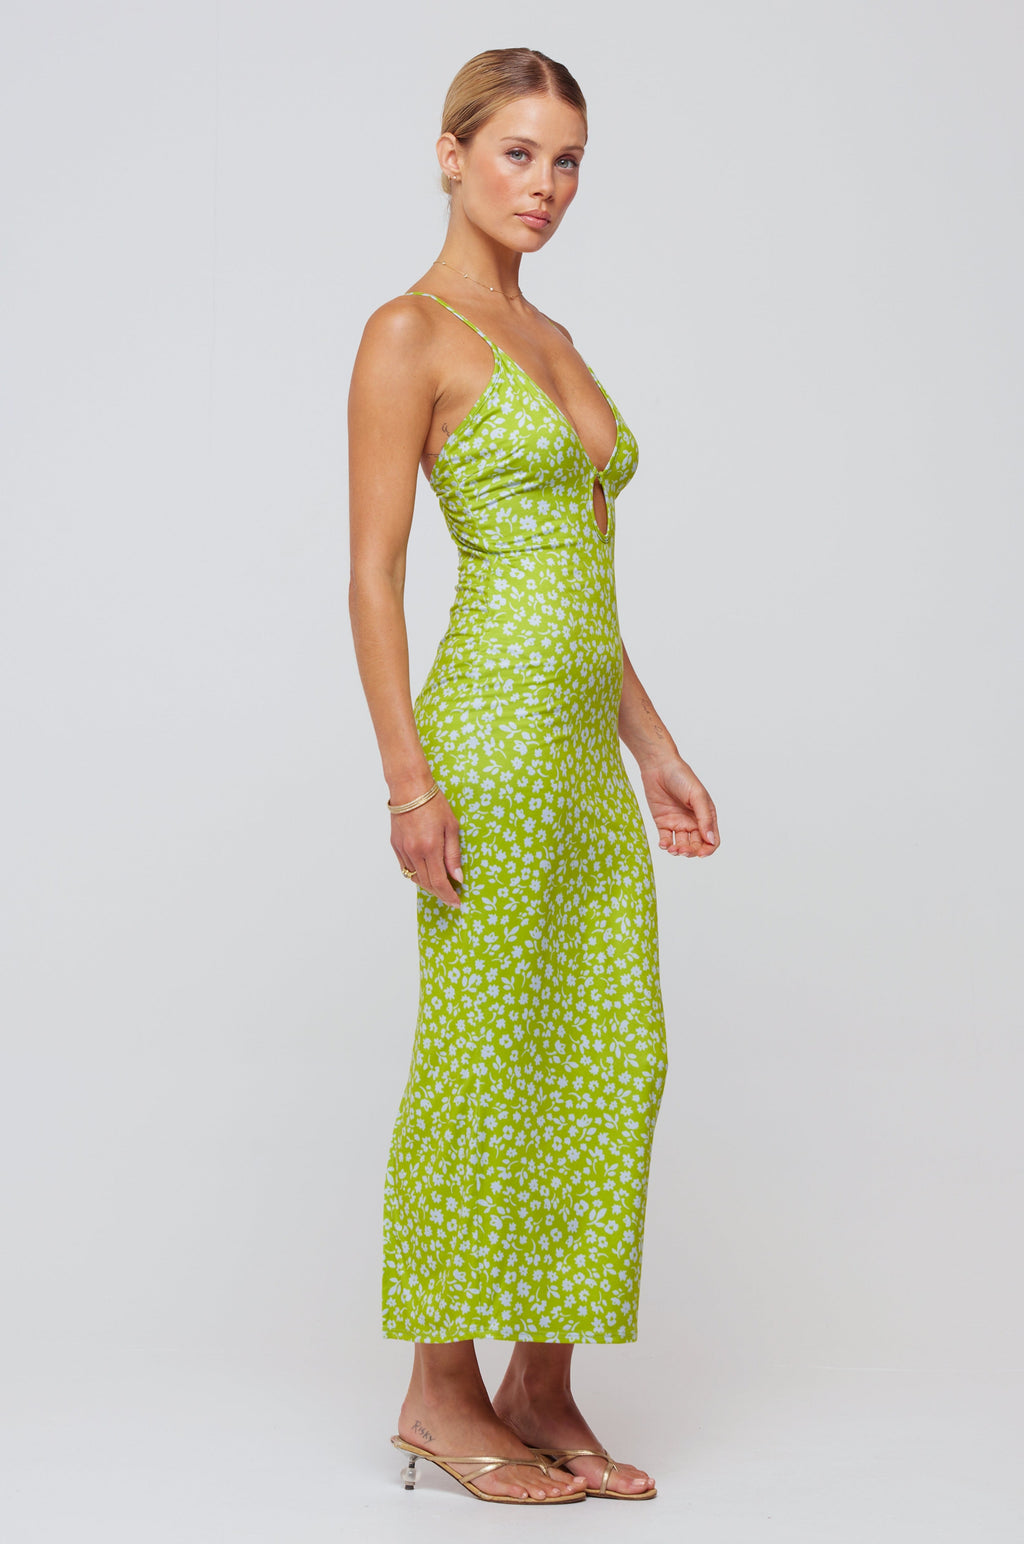 This is an image of Sophia Midi in Kiwi - RESA featuring a model wearing the dress